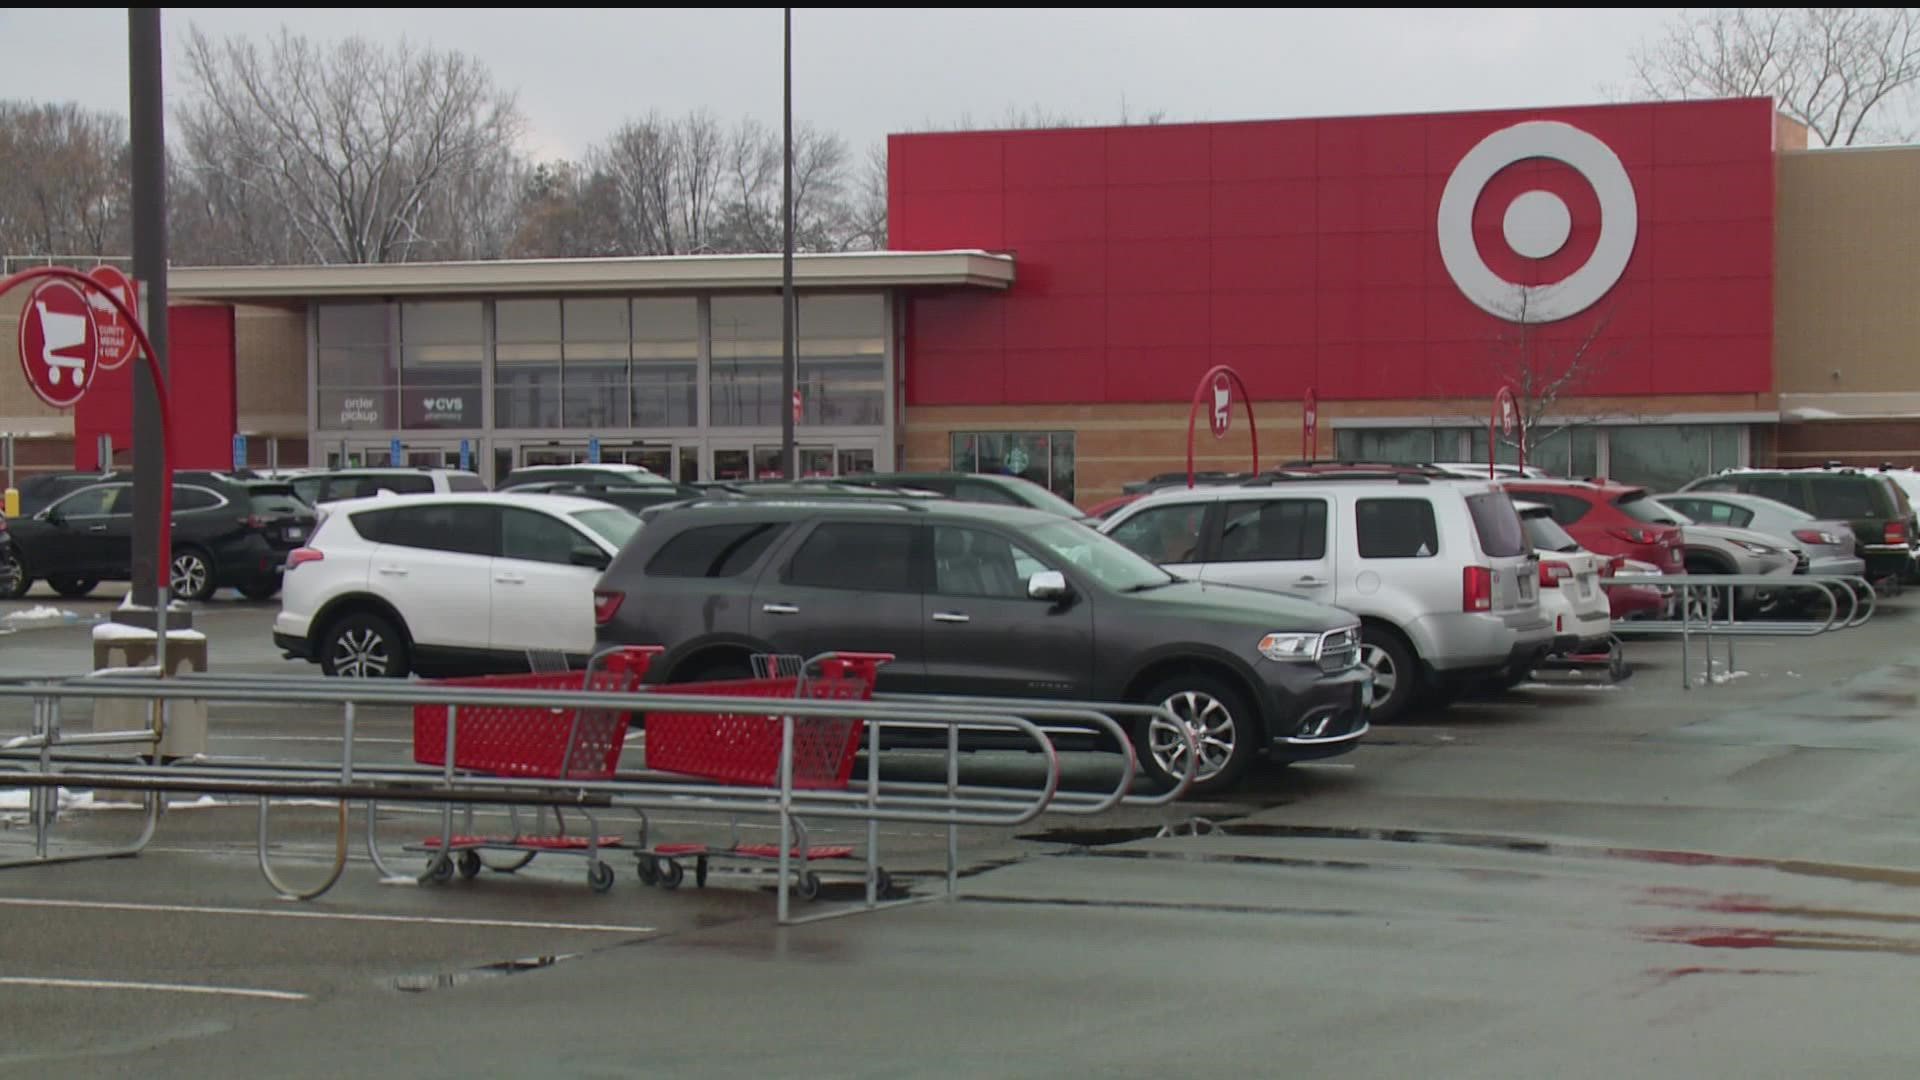 Target CEO Brian Cornel says sales weakened significantly in the weeks leading up to October 29.